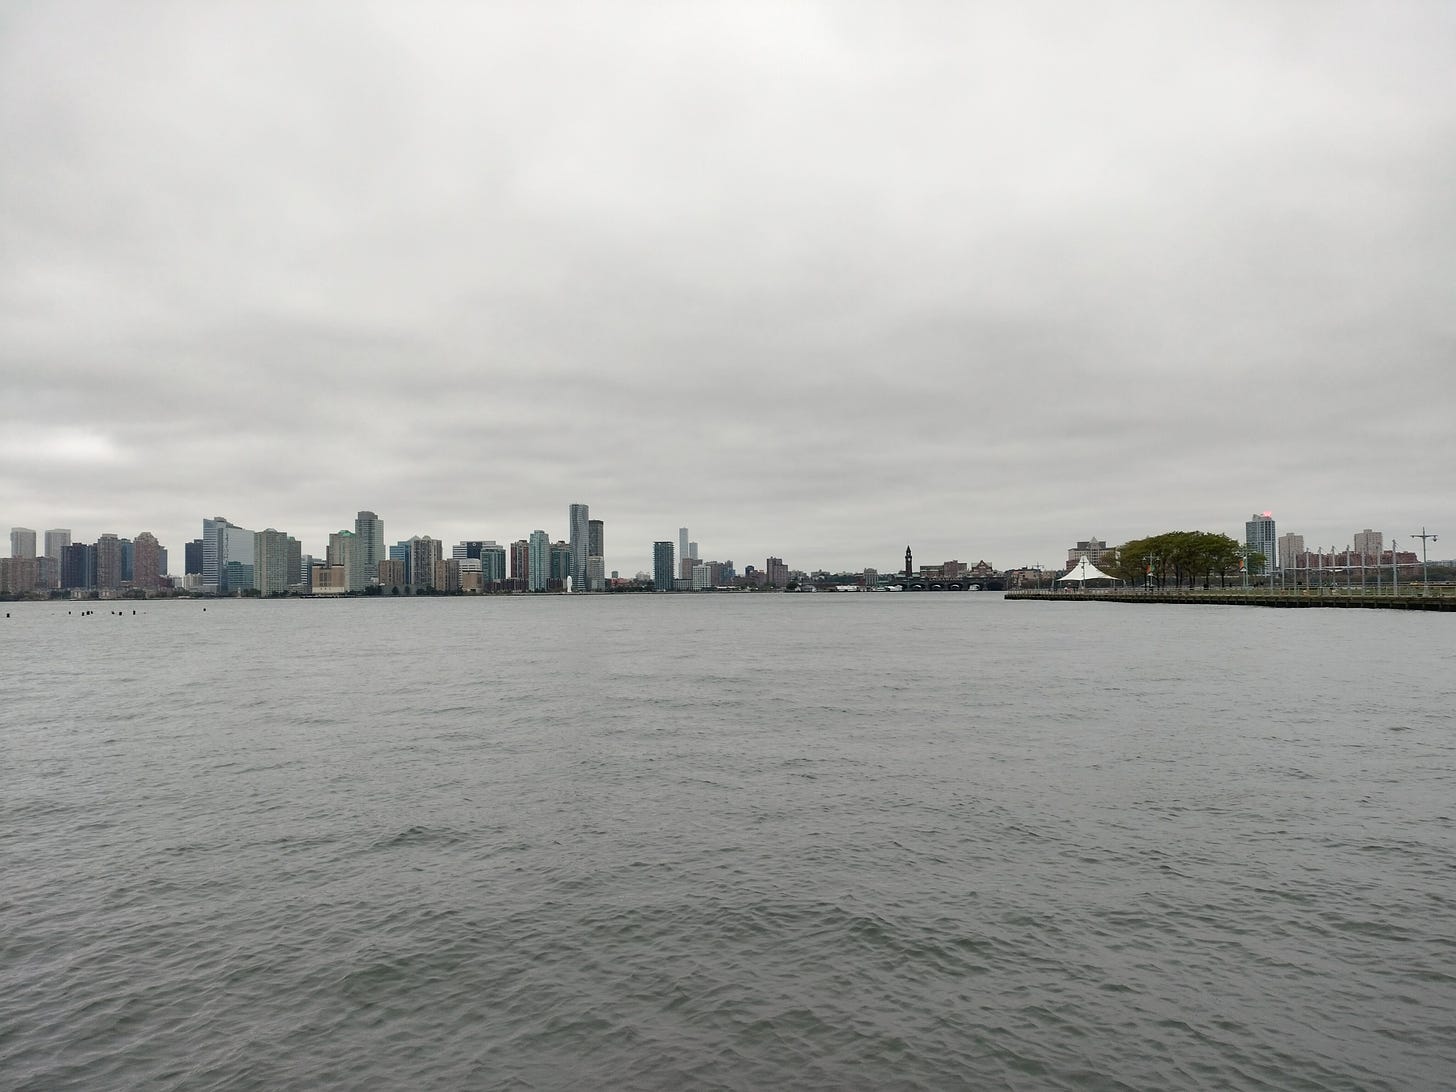 view of Jersey City from Manhattan near the Christopher Street pier